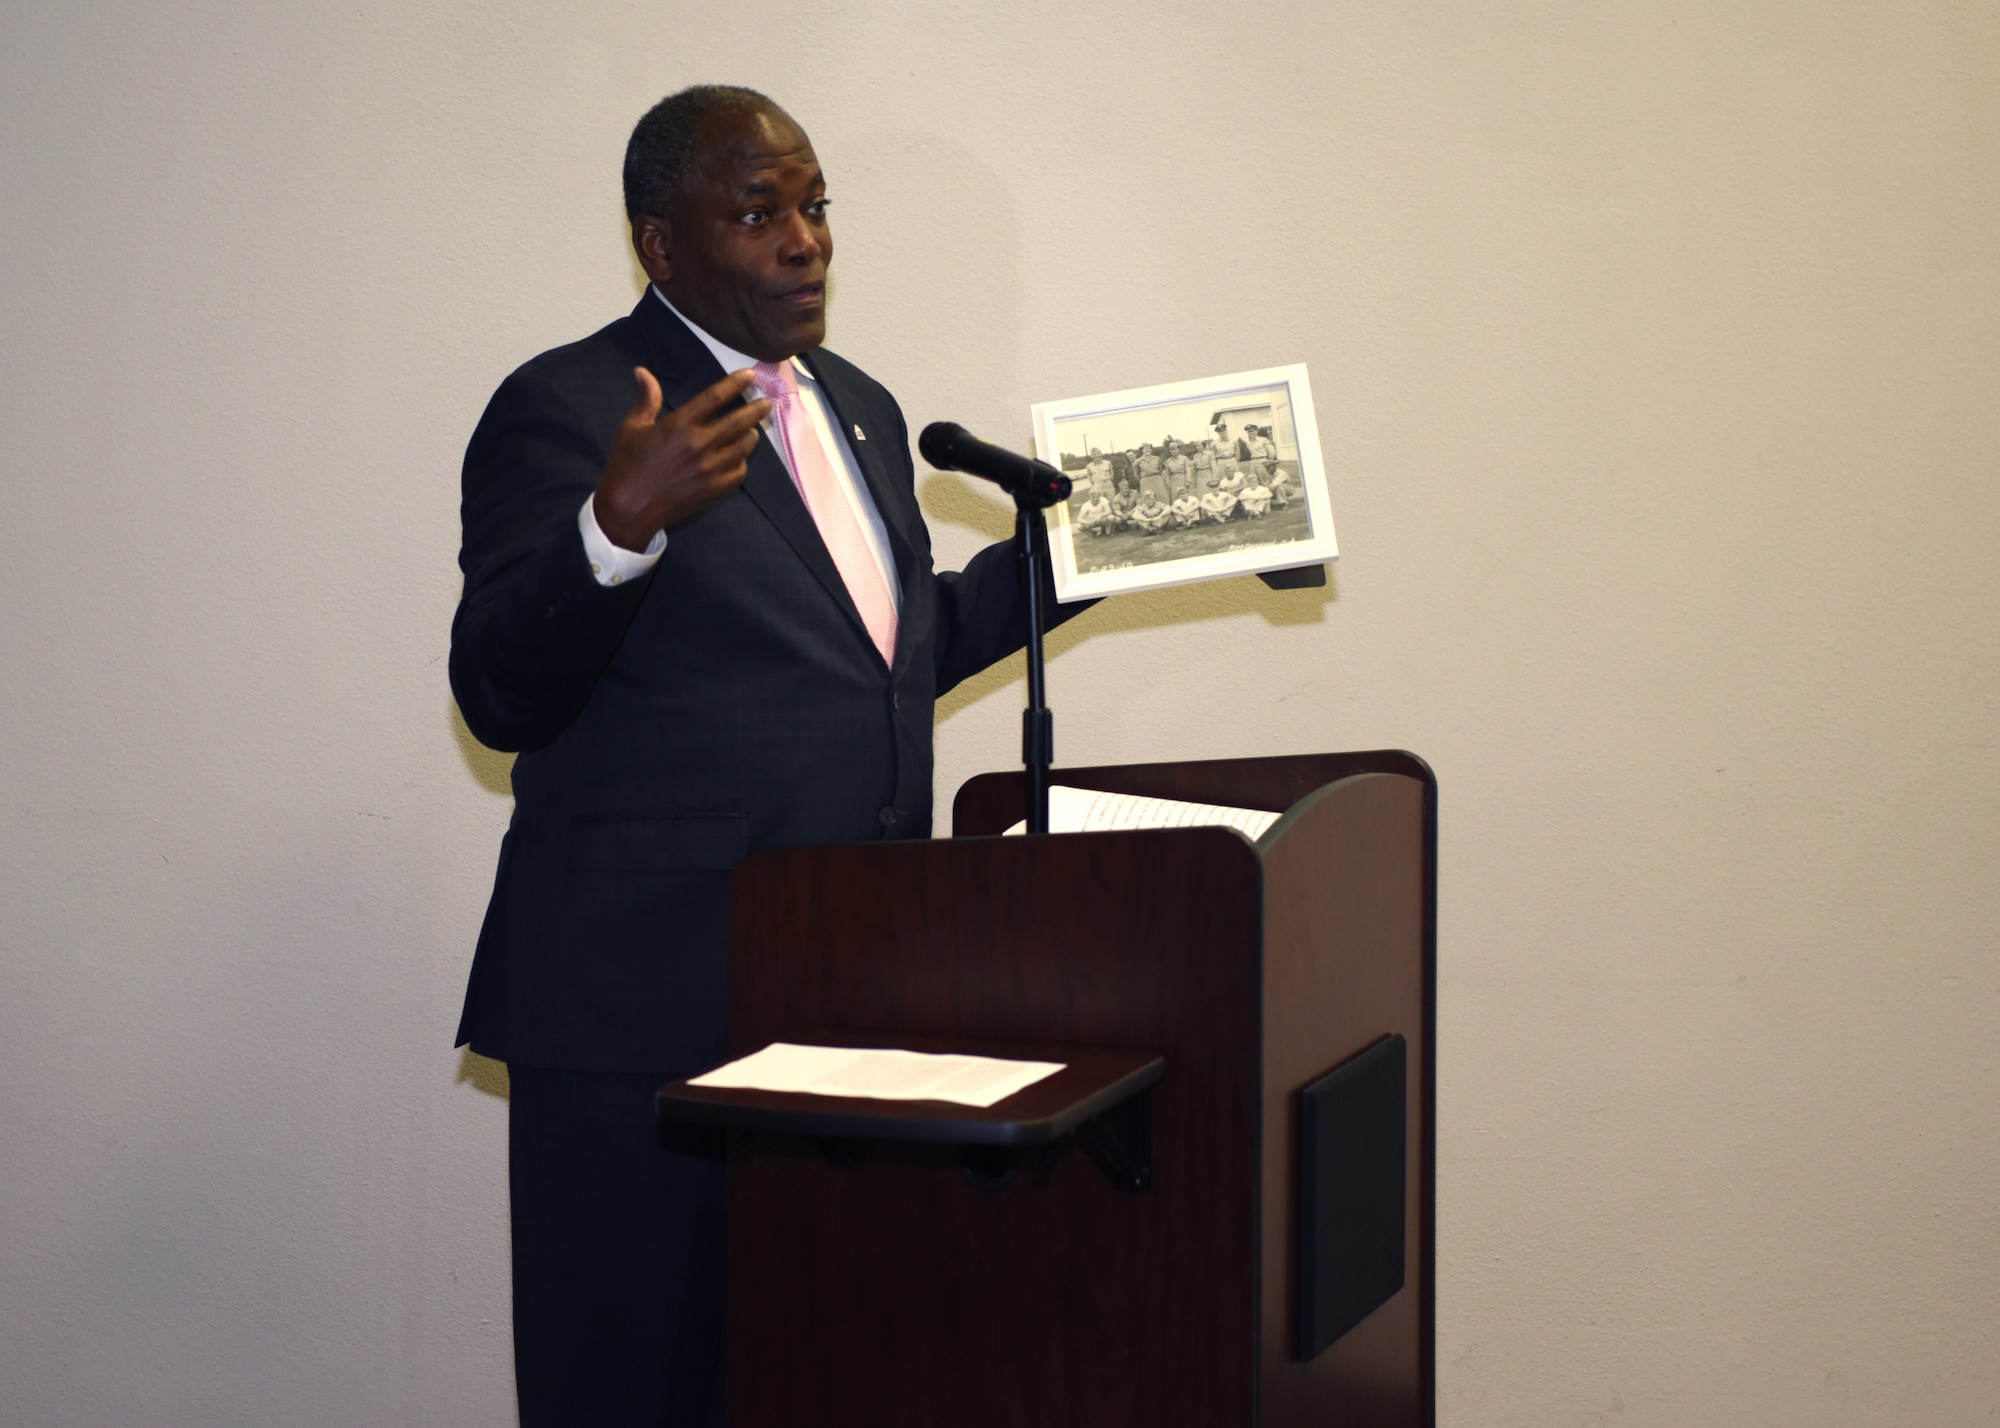 Retired Lt. Gen. Ronnie D. Hawkins, Jr. presents a photo of his father at Goodfellow Air Force Base in 1950 at the Black History Month event in the event center on Goodfellow Air Force Base, Texas, February 20, 2020. Hawkins spoke on the importance of black history in our military and the importance of diversity. (U.S. Air Force photo by Airman 1st Class Ethan Sherwood)